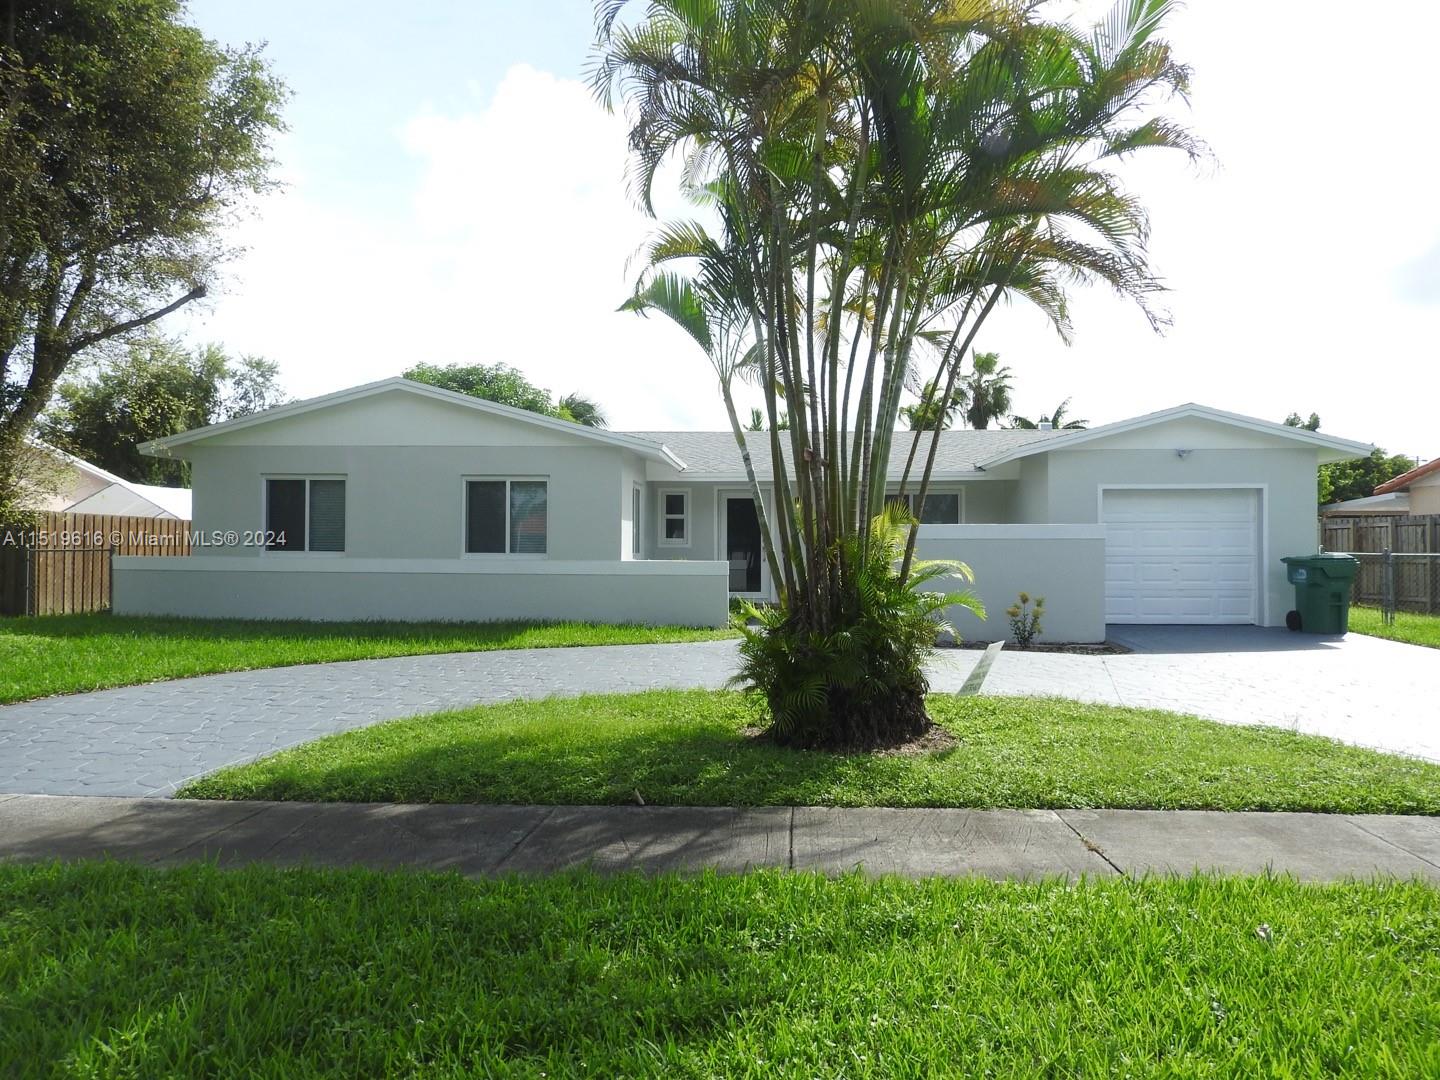 12470 SW 106th St, Miami, Florida 33186, 4 Bedrooms Bedrooms, ,2 BathroomsBathrooms,Residentiallease,For Rent,12470 SW 106th St,A11519616